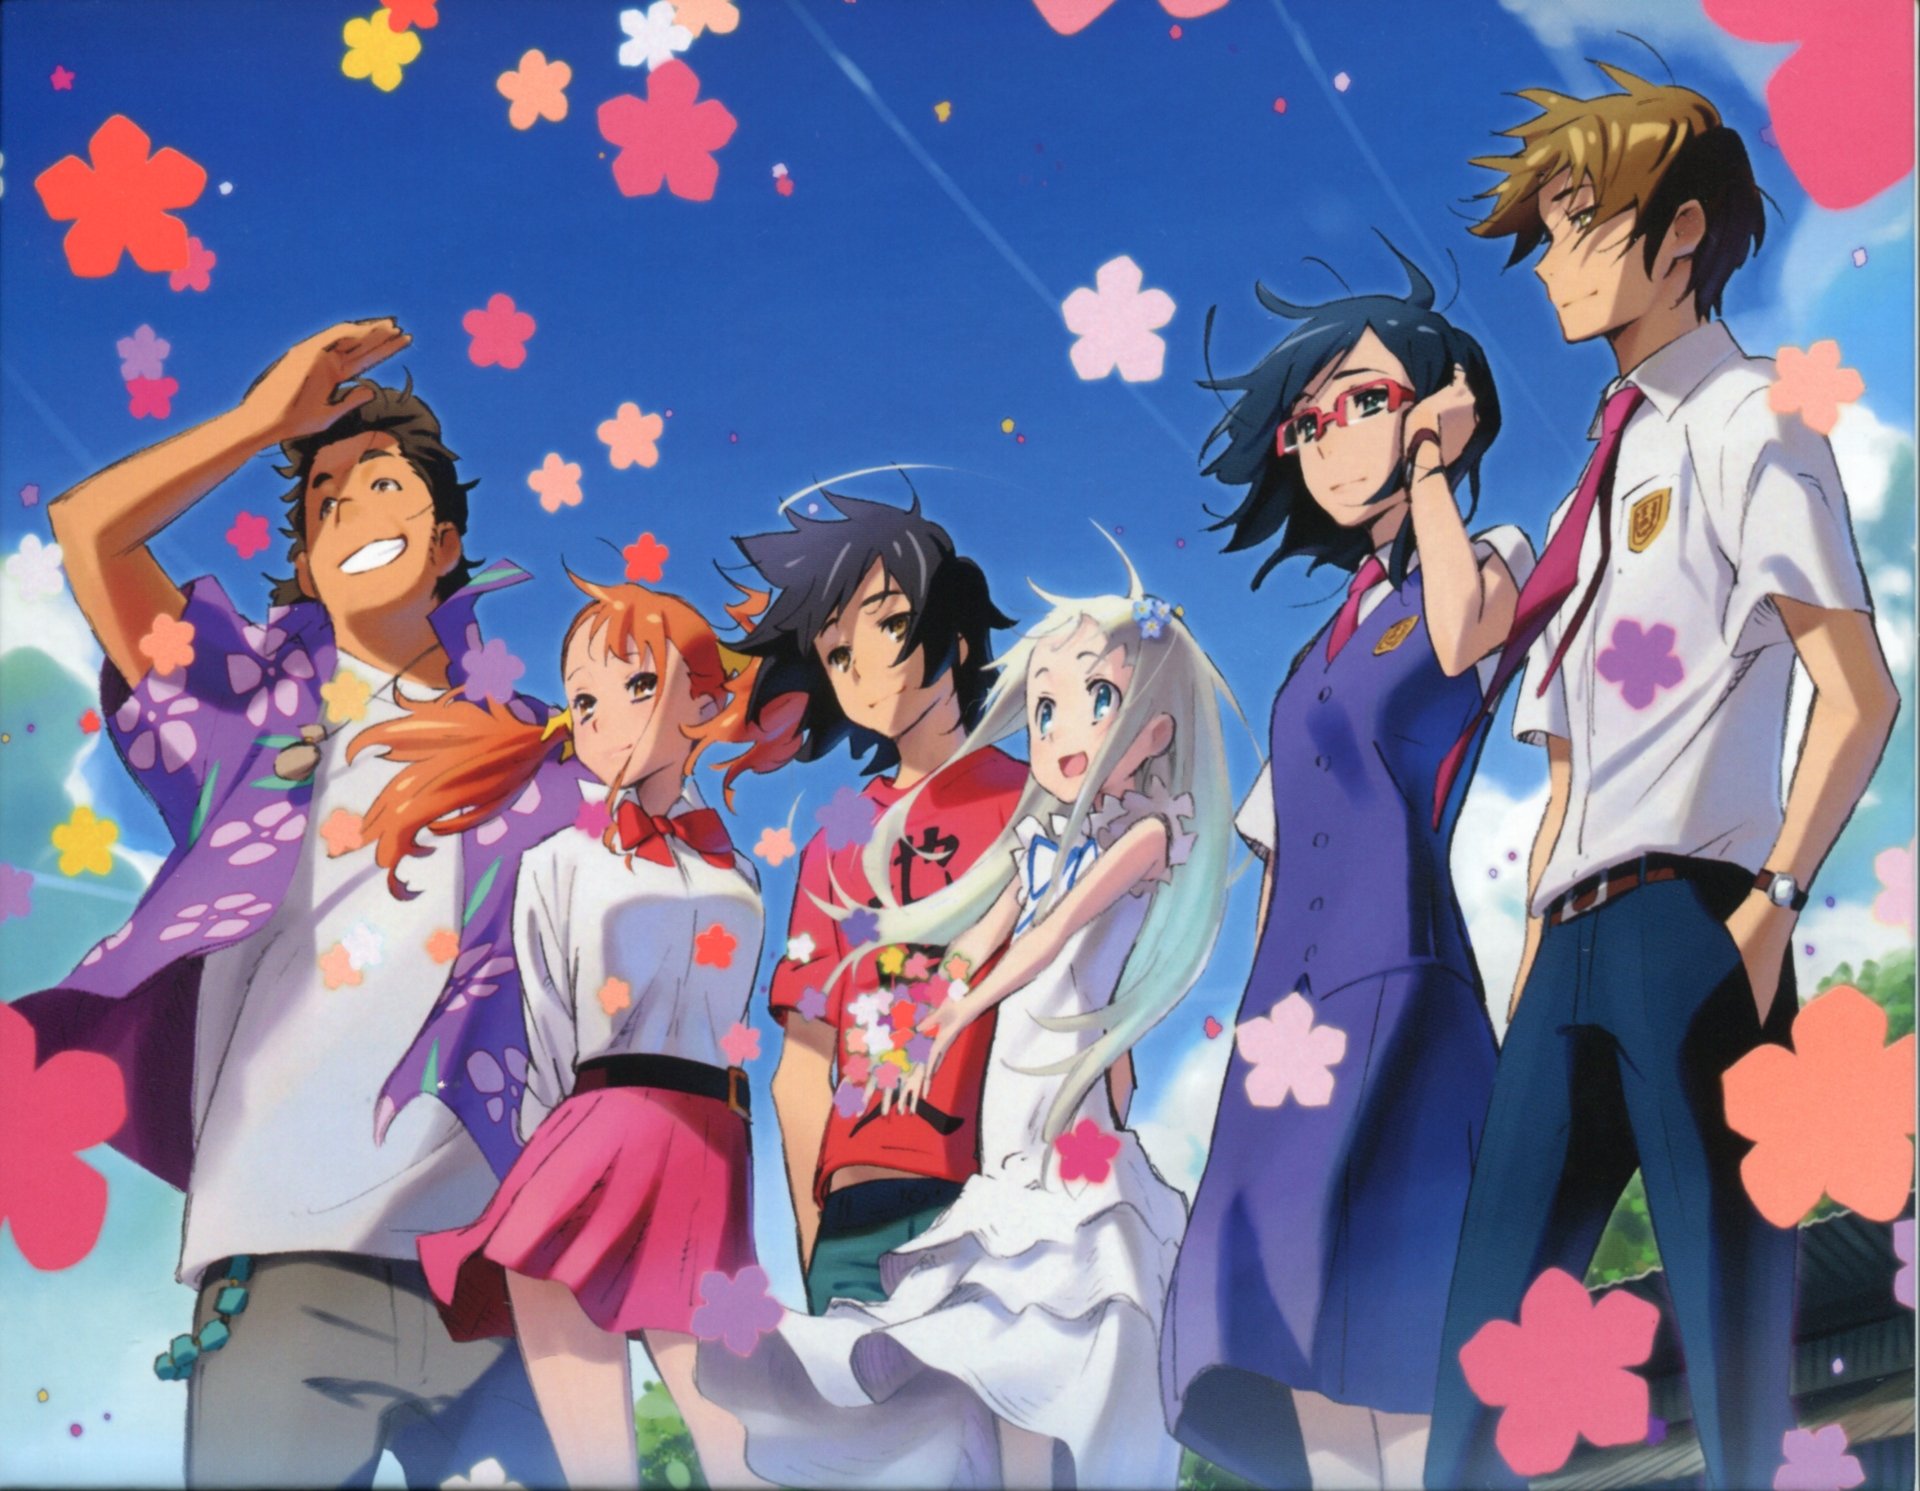 Anime Wallpaper HD: Anohana Wallpaper For Android